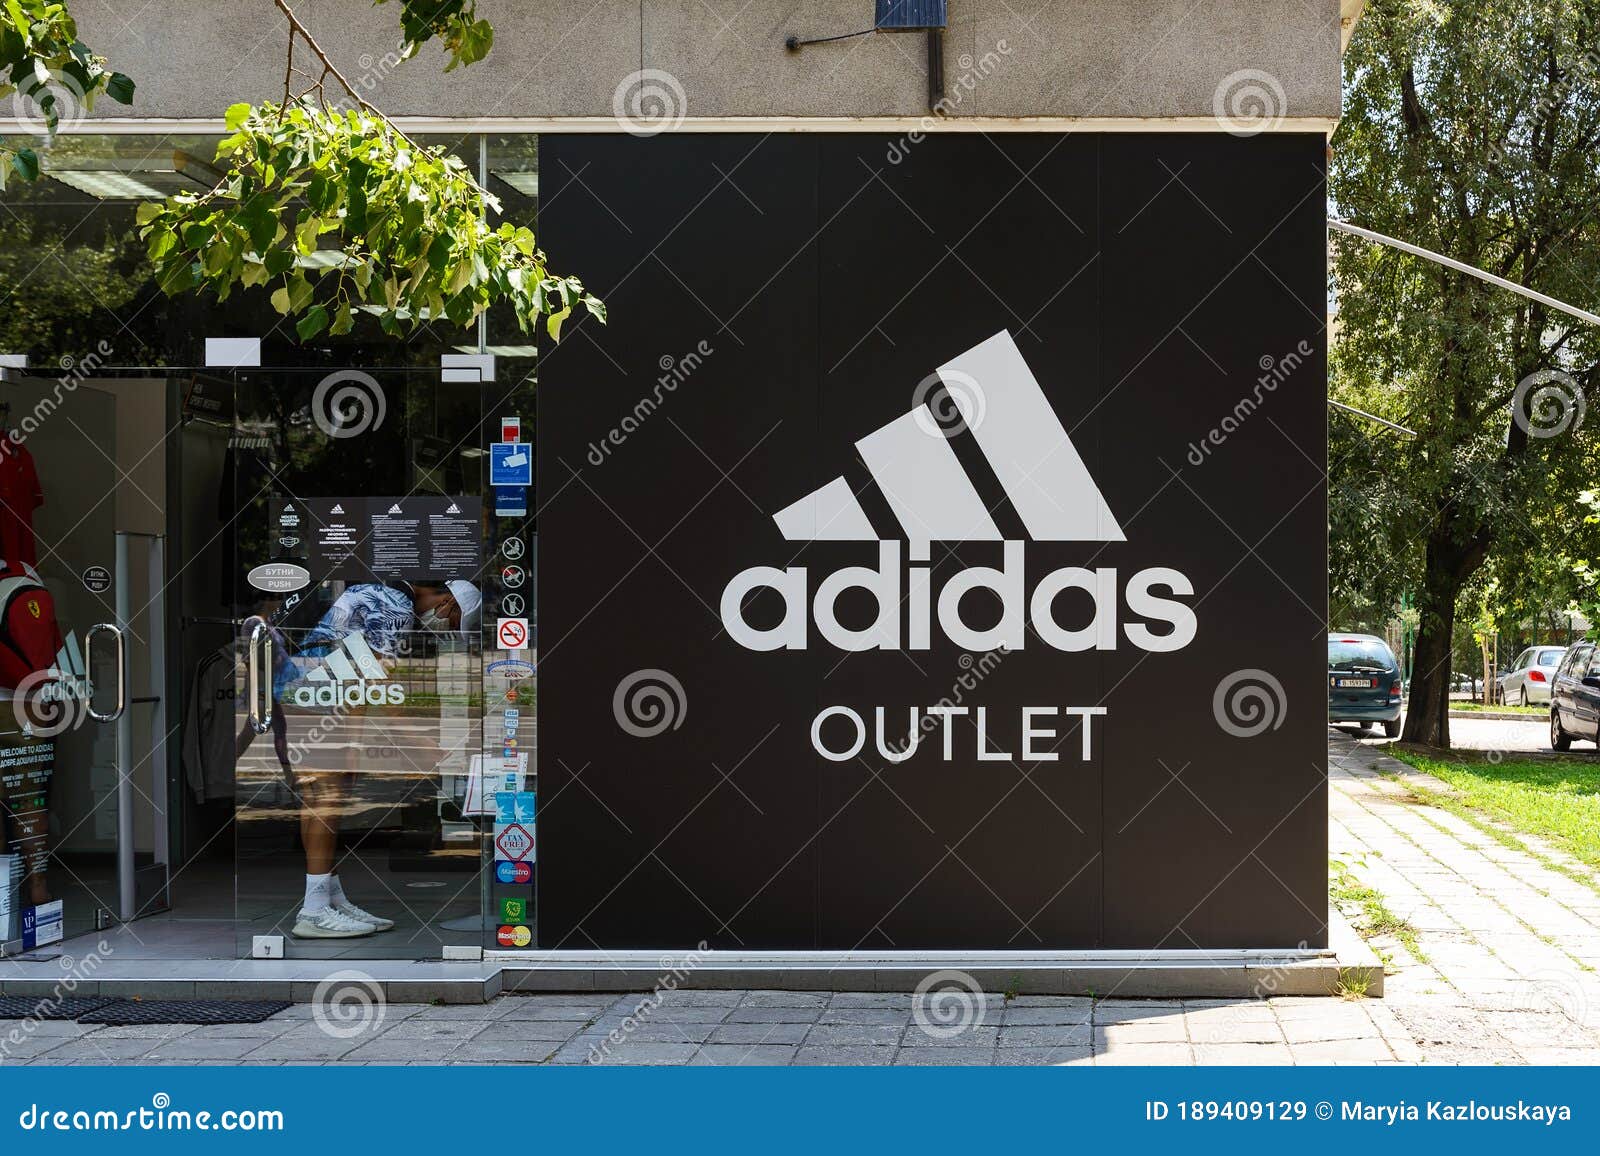 Entrance To Adidas Outlet Shop from a City Street on a Sunny Day. Signboard of Adidas Logo Brend Sign on Store, Boutique Stock Image - Image of clothing, 189409129